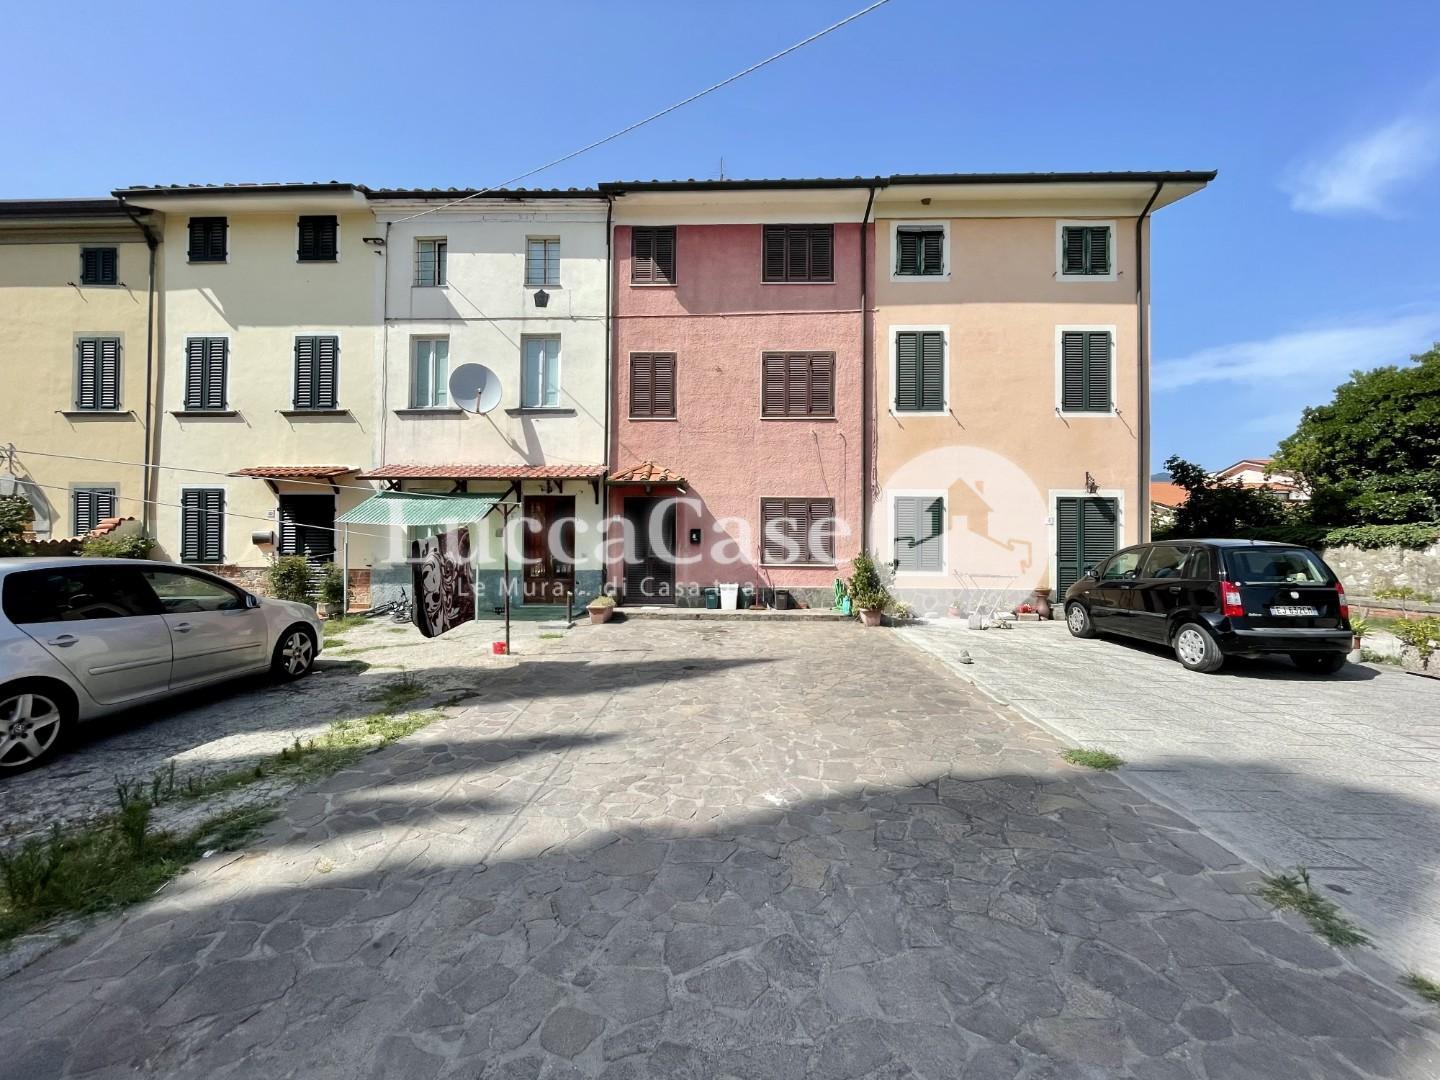 Townhouses for sale, ref. E036A